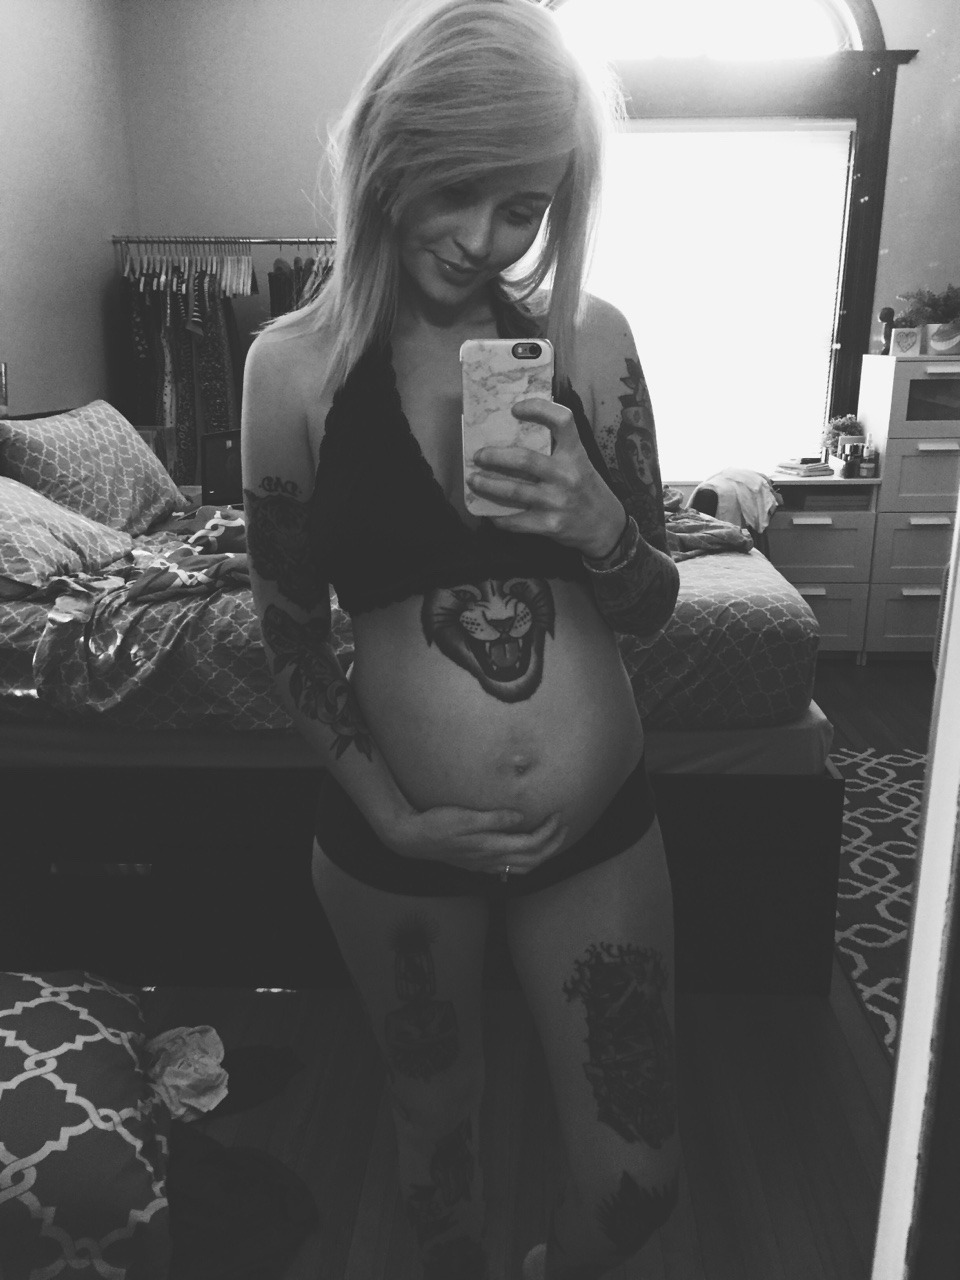 rspnsblprty:Feeling real cute today and loving my bump, which is a rare occasion